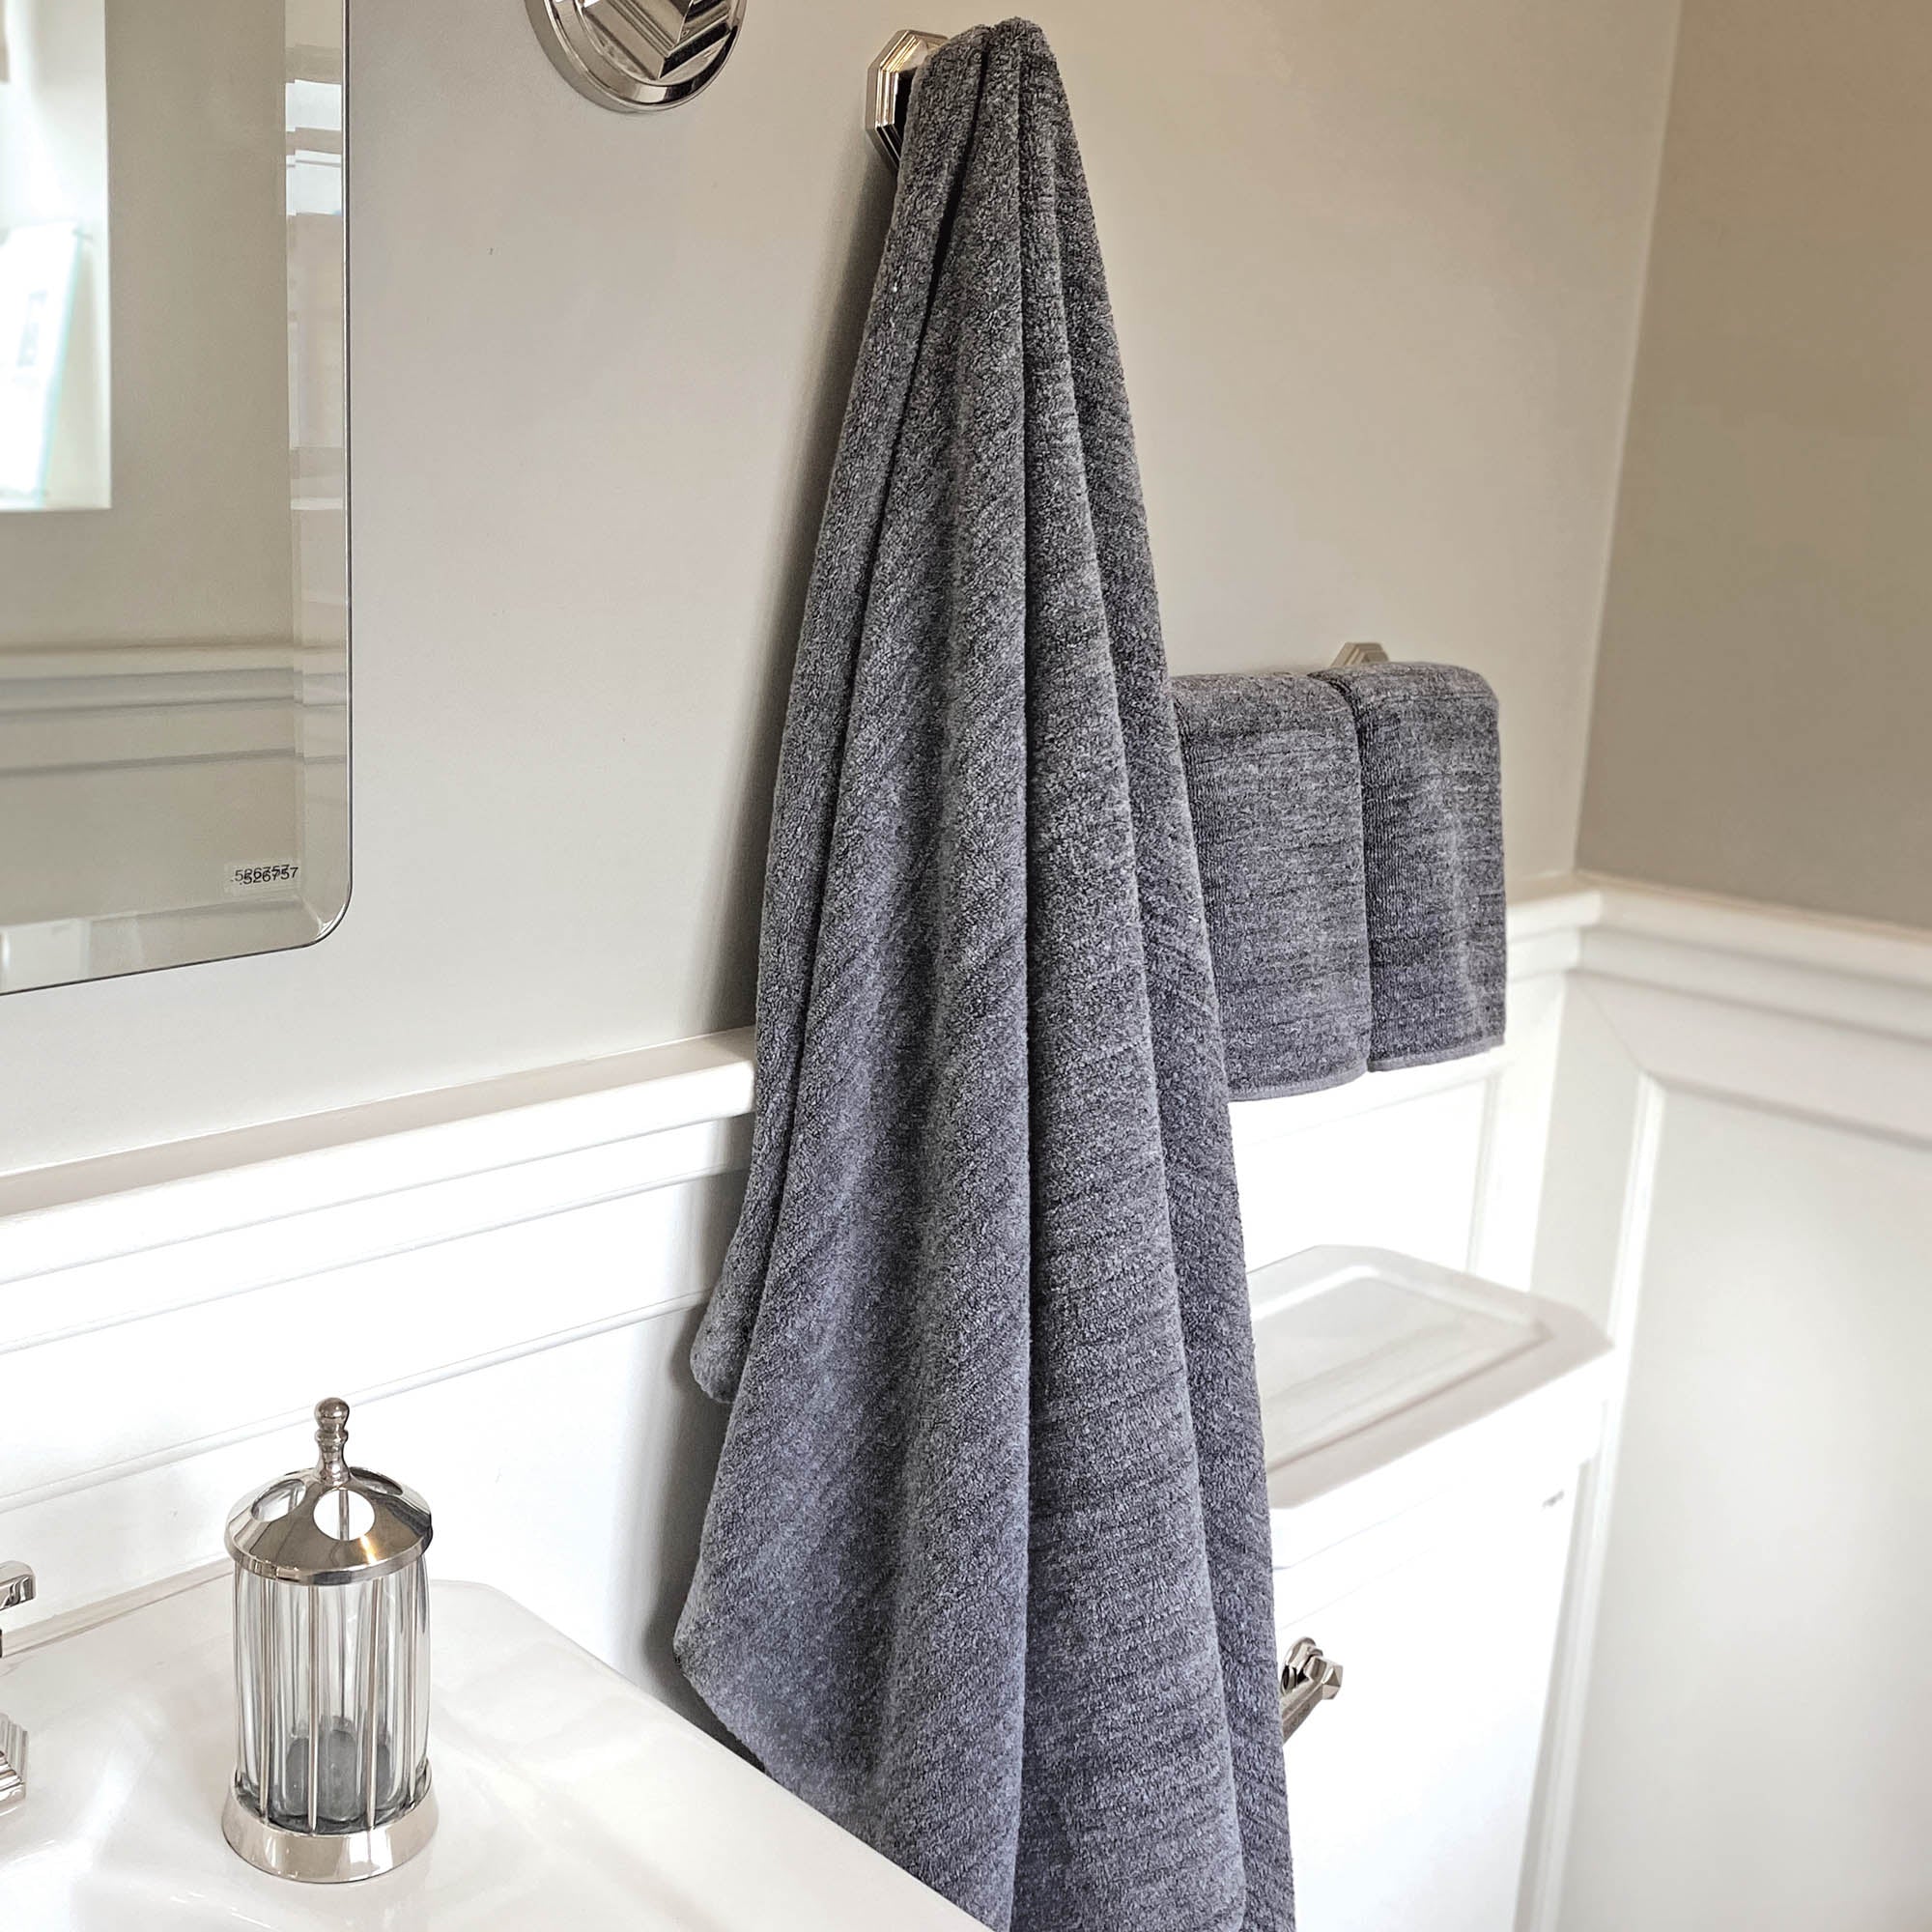 charcoal gray melange bamboo bath sheet and hand towels hanging in a bathroom